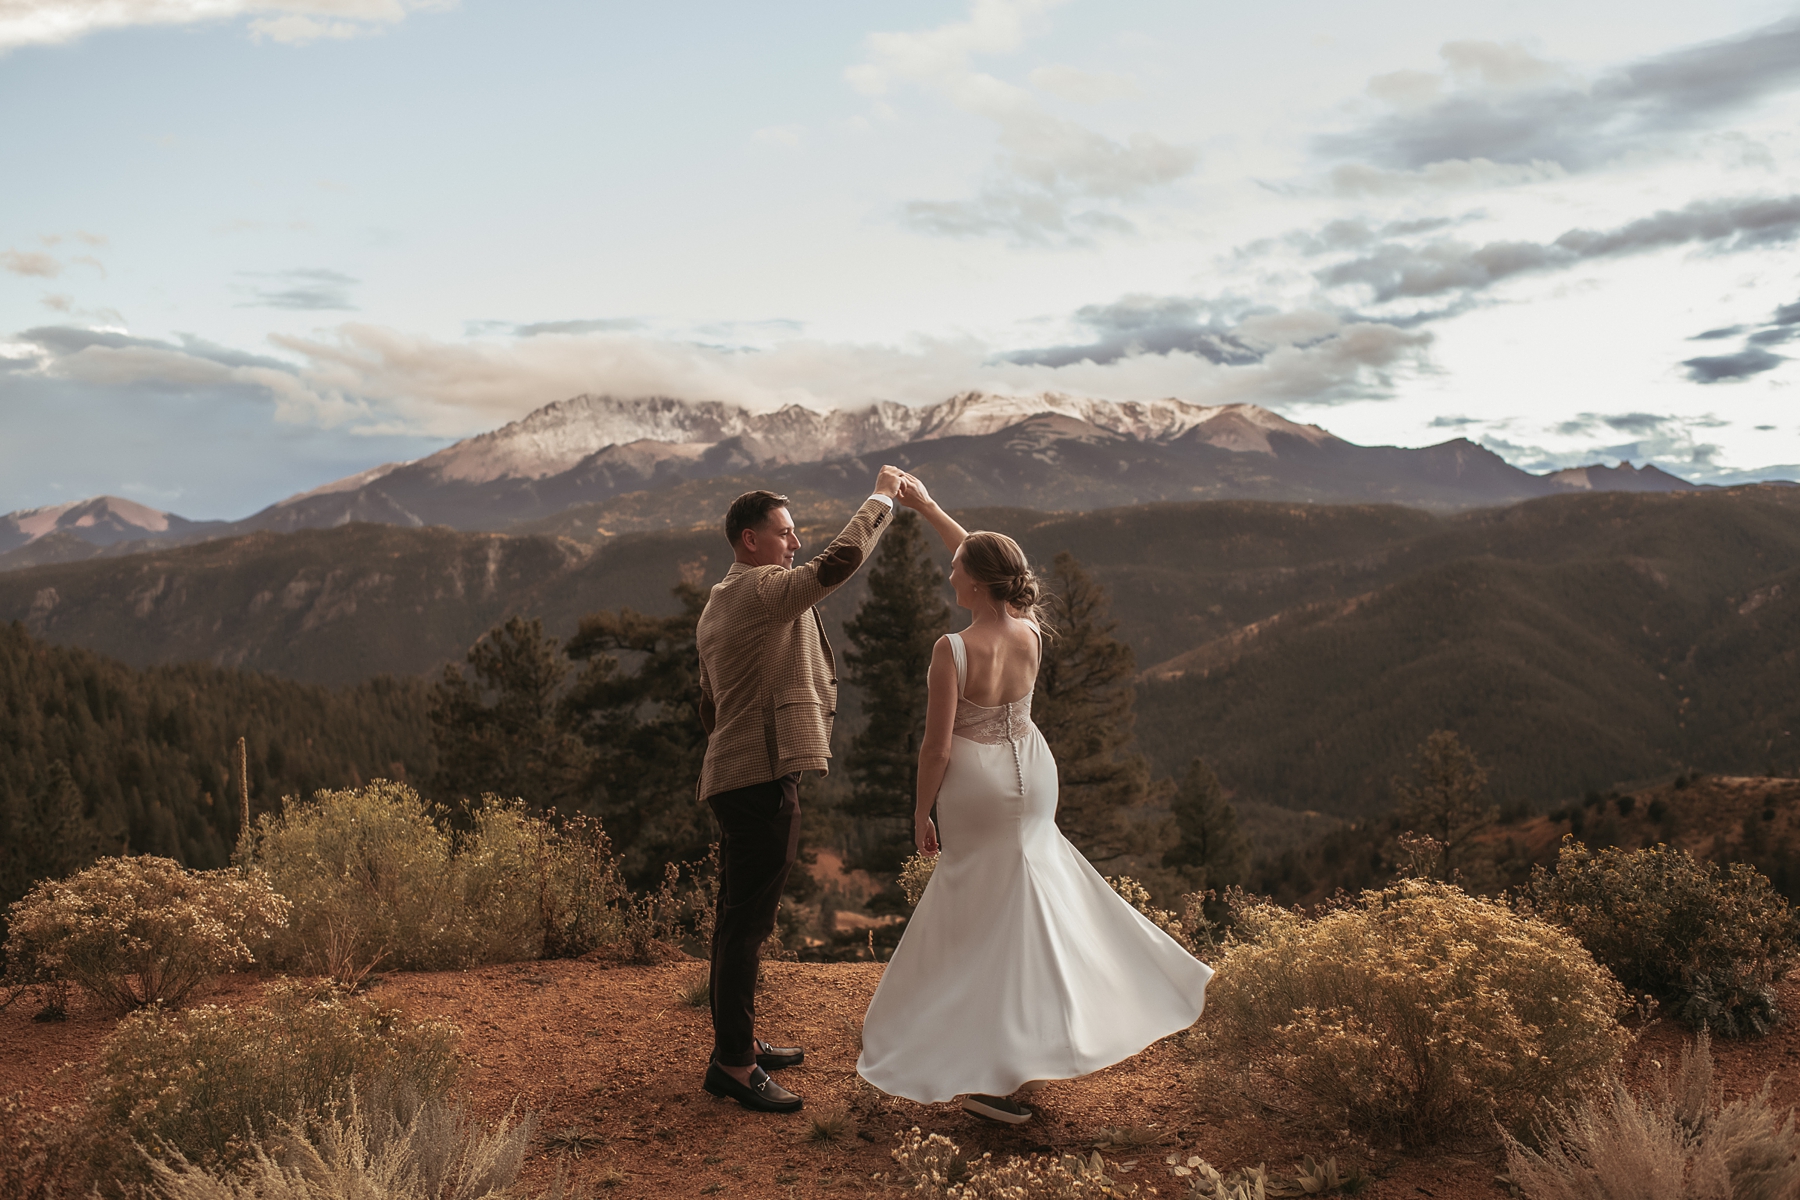 Groom twirling bride in front of mountains at Airbnb wedding venue in Colorado